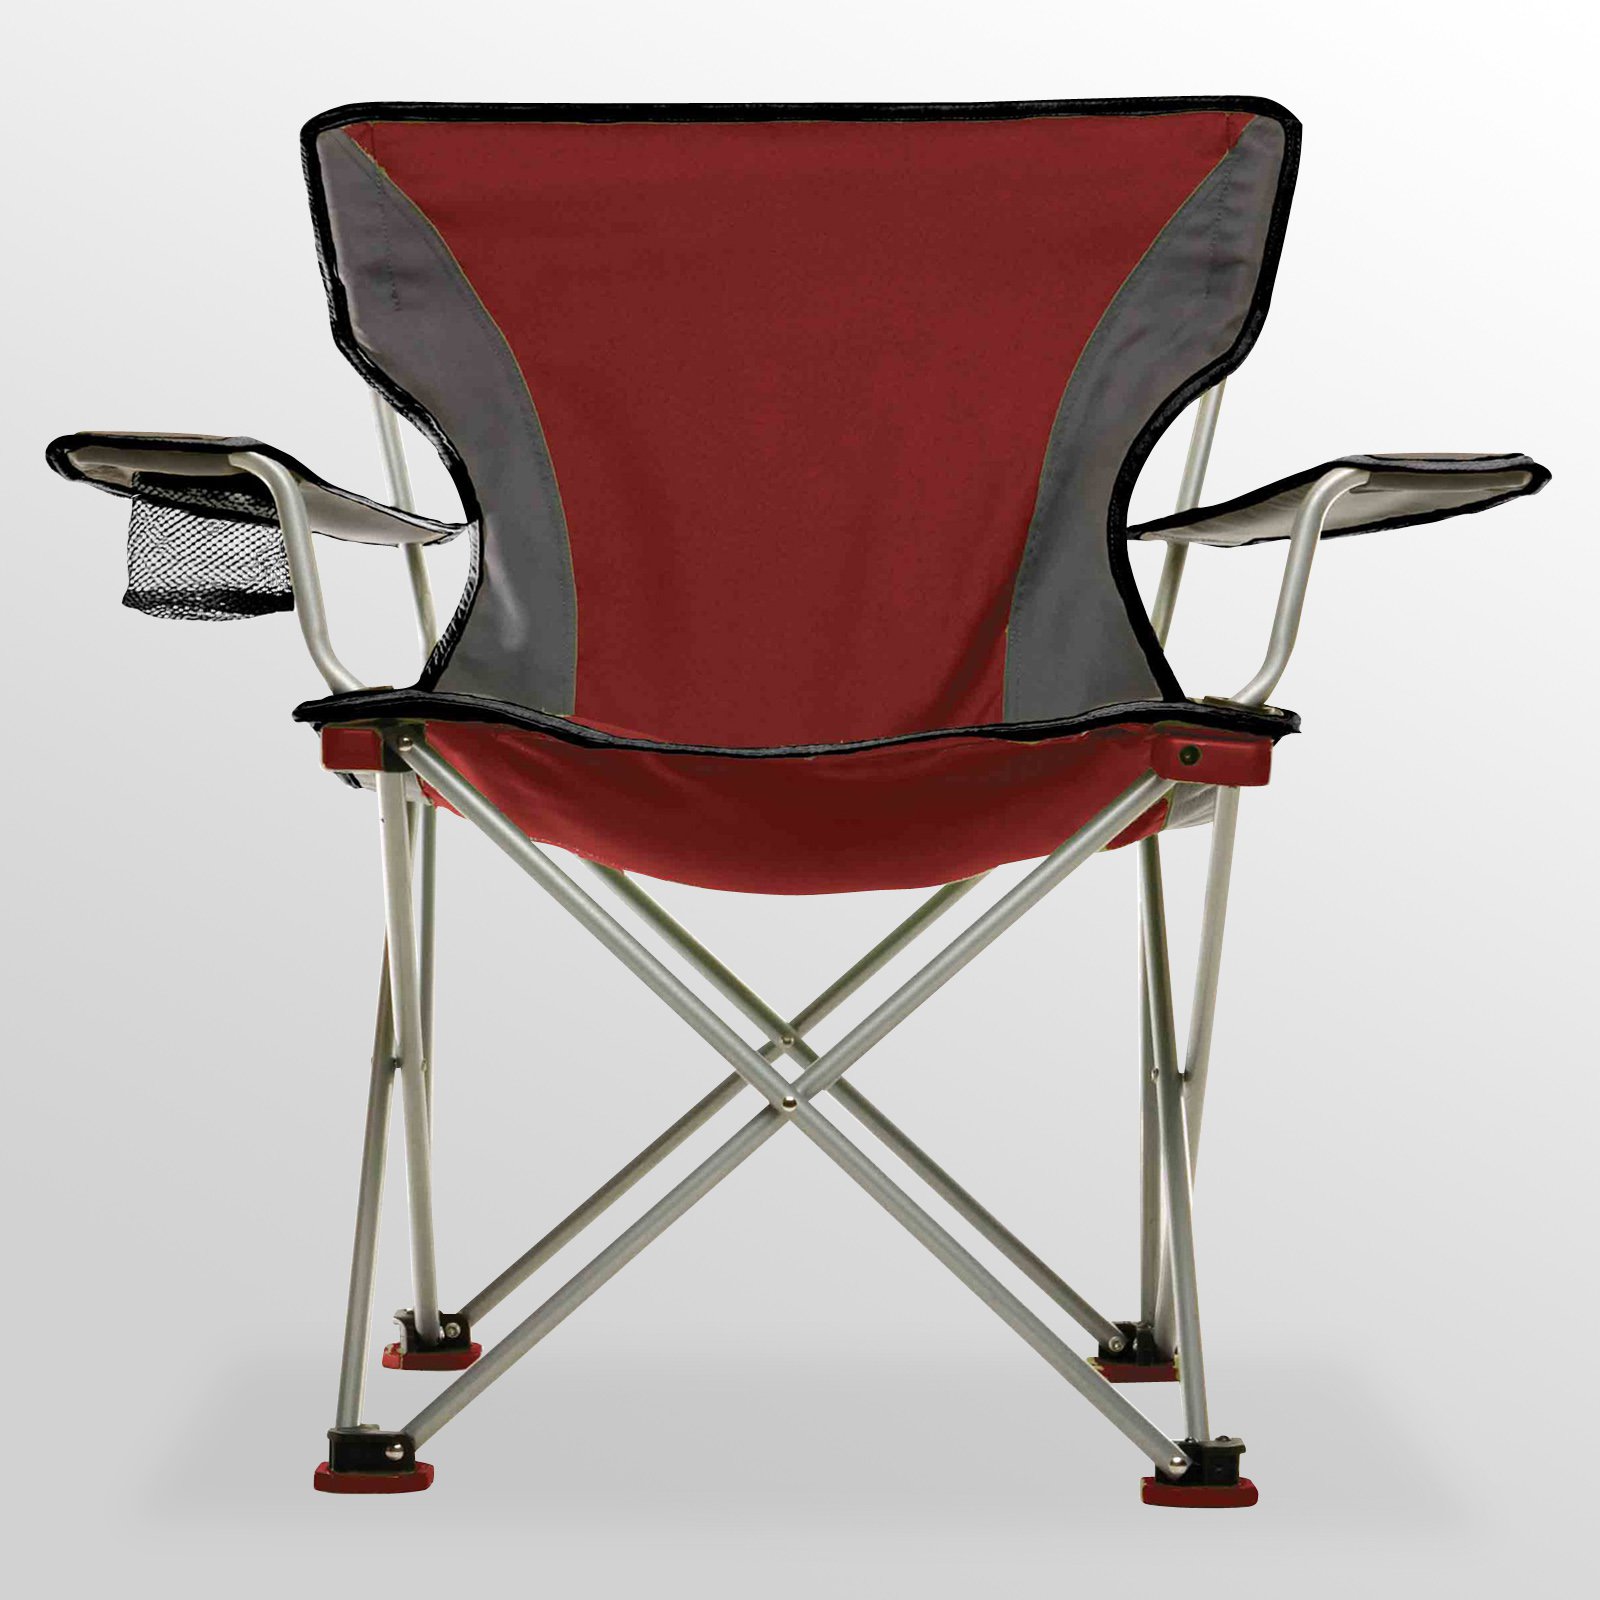 The Travel Chair Easy Rider - image 1 of 2